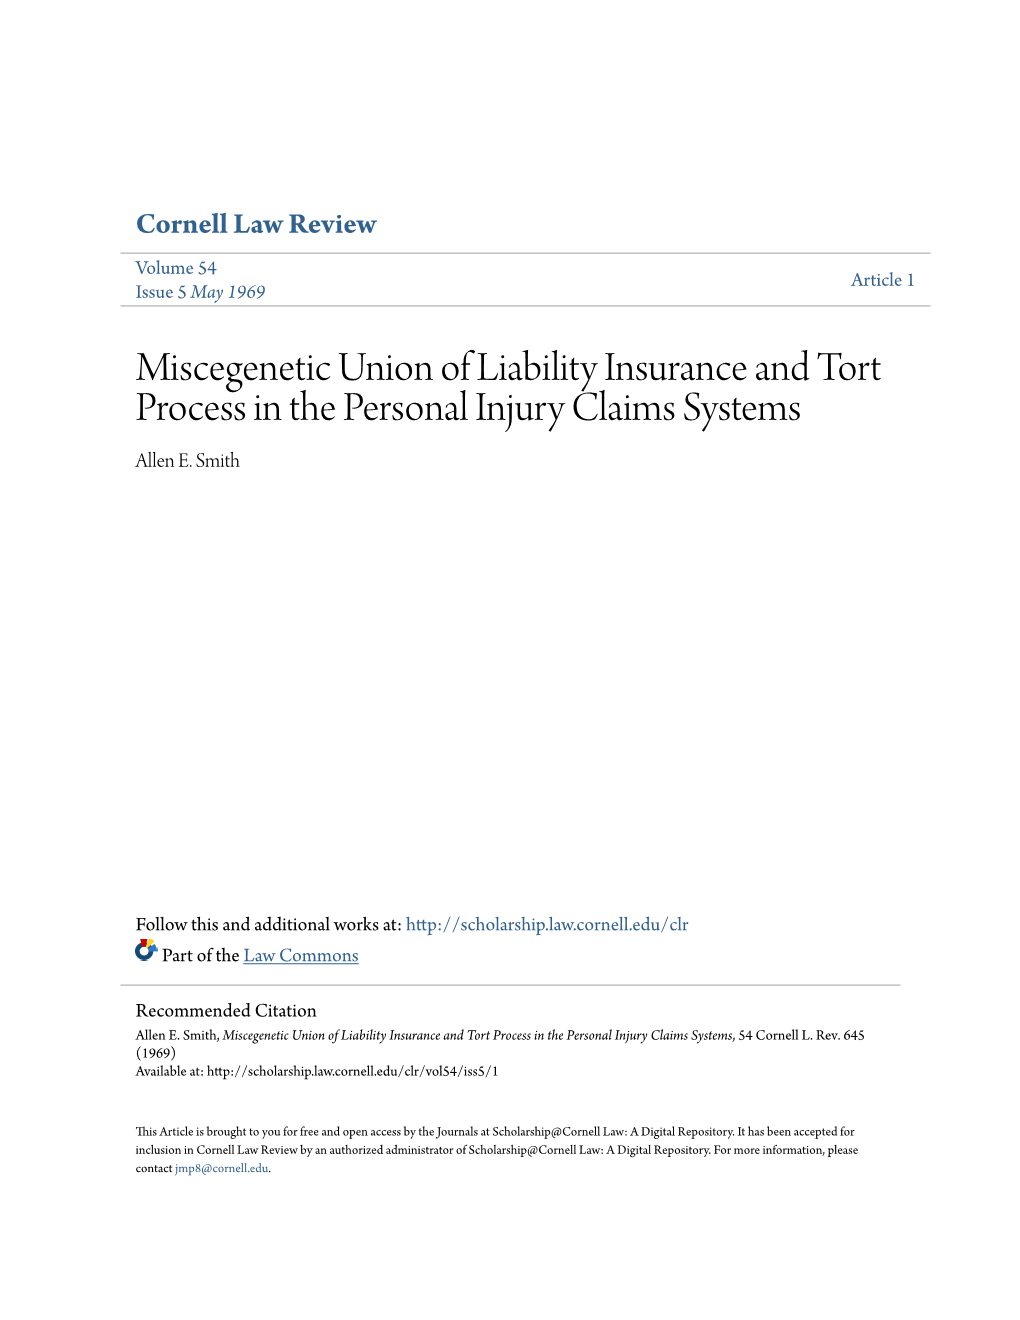 Miscegenetic Union of Liability Insurance and Tort Process in the Personal Injury Claims Systems Allen E